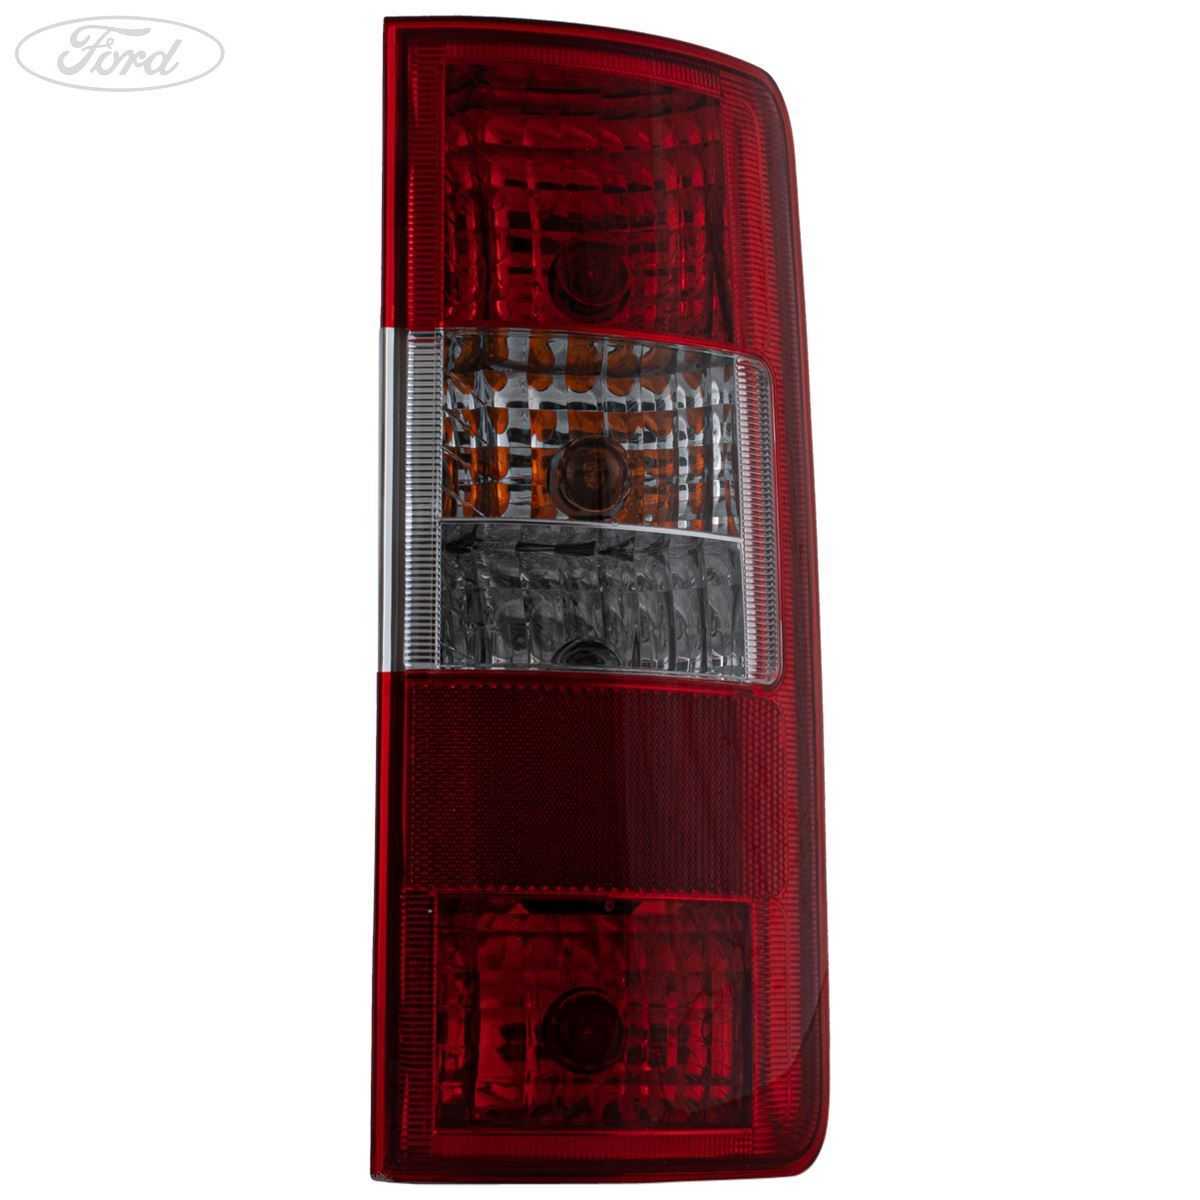 Ford, TRANSIT CONNECT REAR DRIVER SIDE TAIL LIGHT LAMP CLUSTER 2002-2013